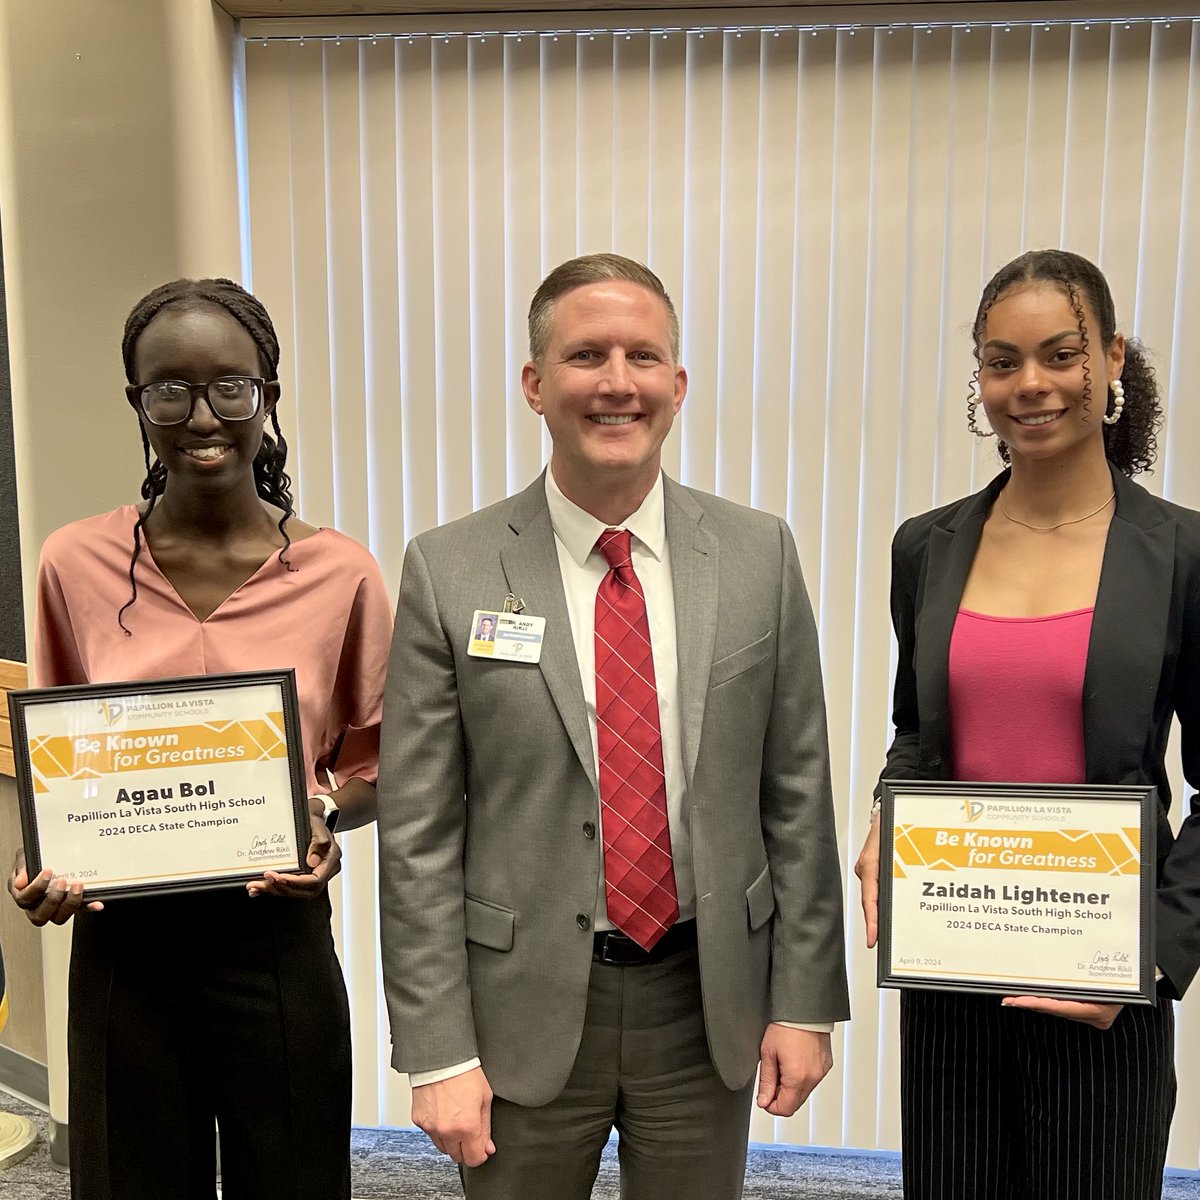 🌟 Celebrating success at the Board of Education meeting! 🌟 Huge congrats to the DECA champs from PLSHS: Zaidah Lightener (pictured); Agau Bol (pictured) & Emily Cortes; and, Jacob Hippe & Logan Deyke! 🏆 They conquered 1st place in their categories! #PLCSGreat